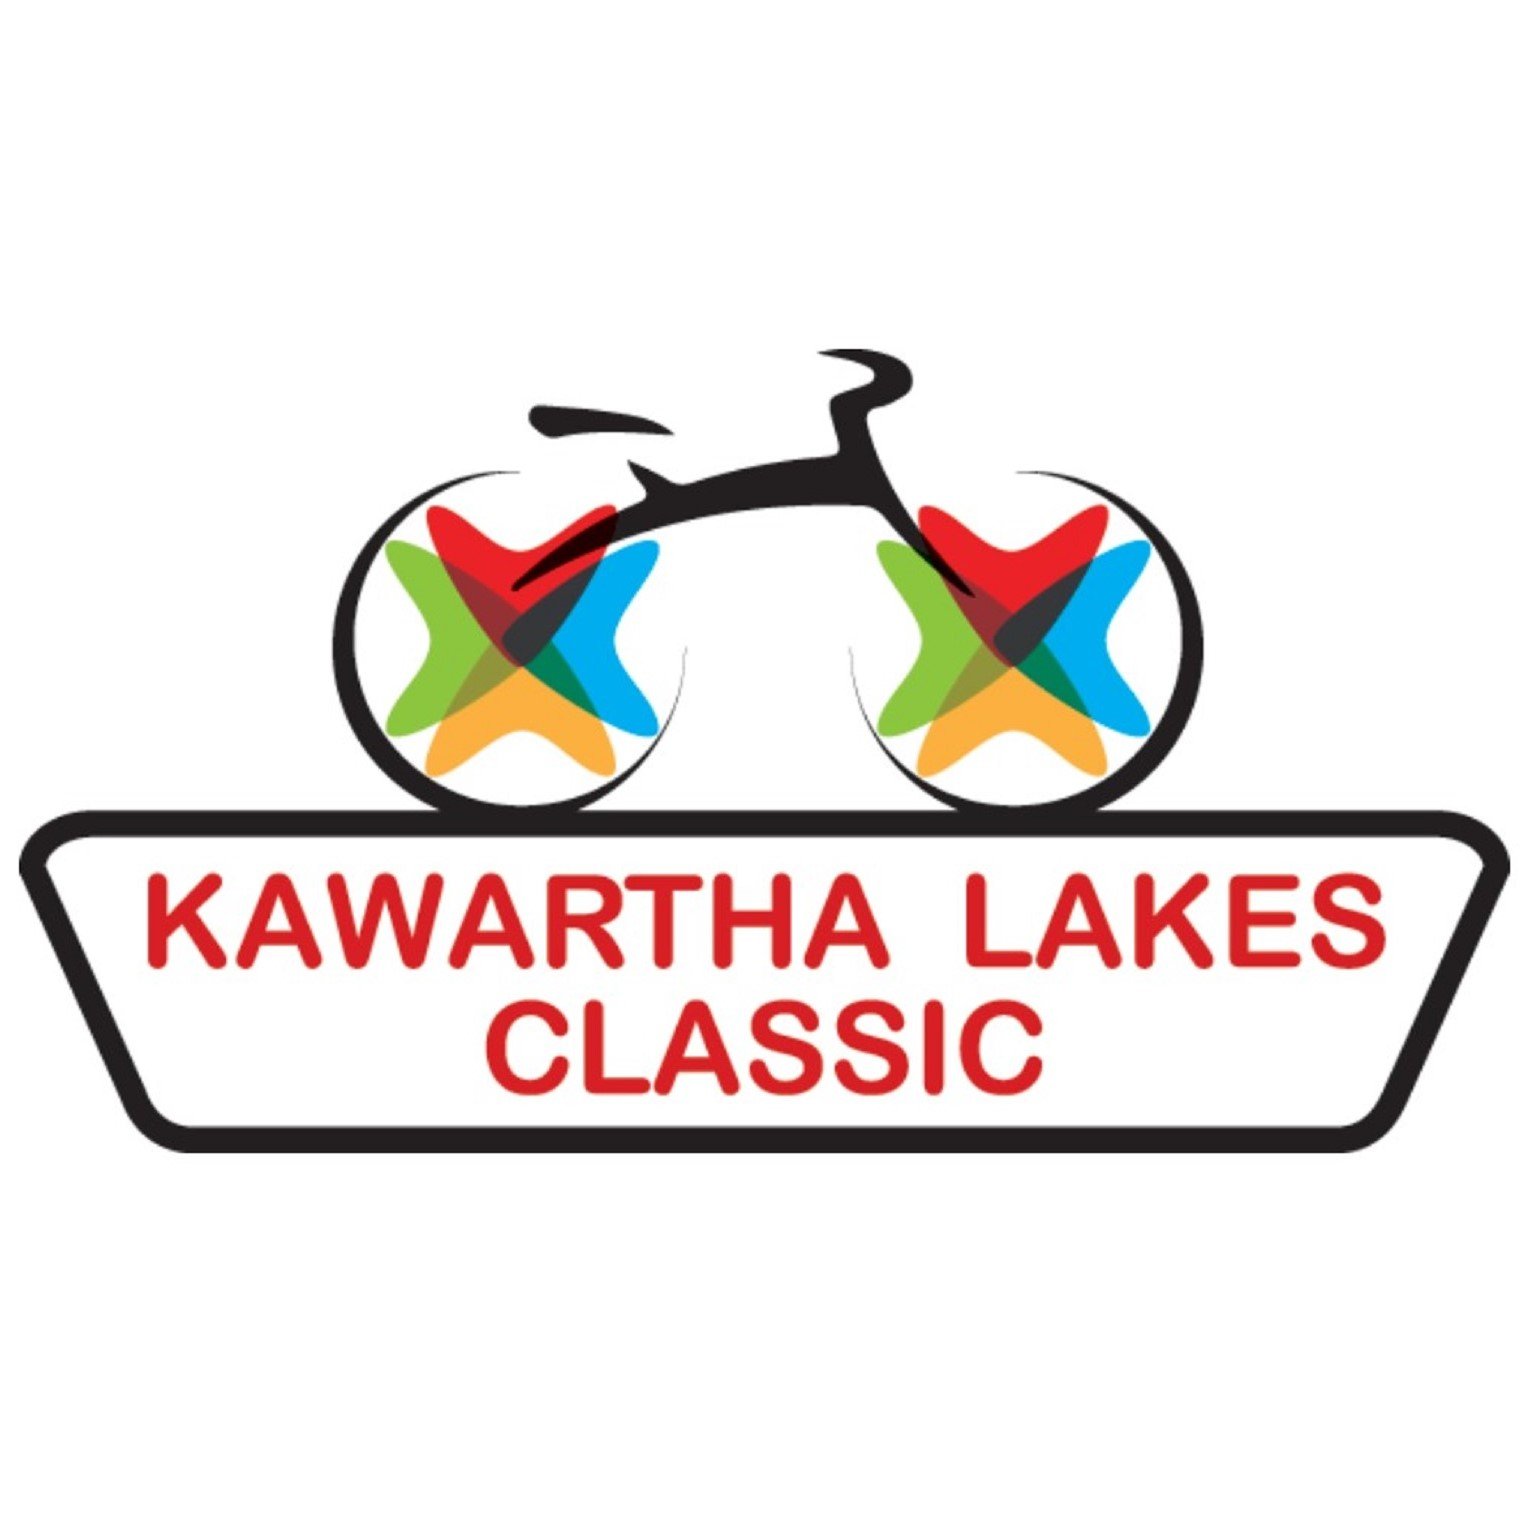 This Classic Cycling Tour has routes of ranging from 13-160 km suited for levels of riders. All funds raised from this event support @APCHLindsay.